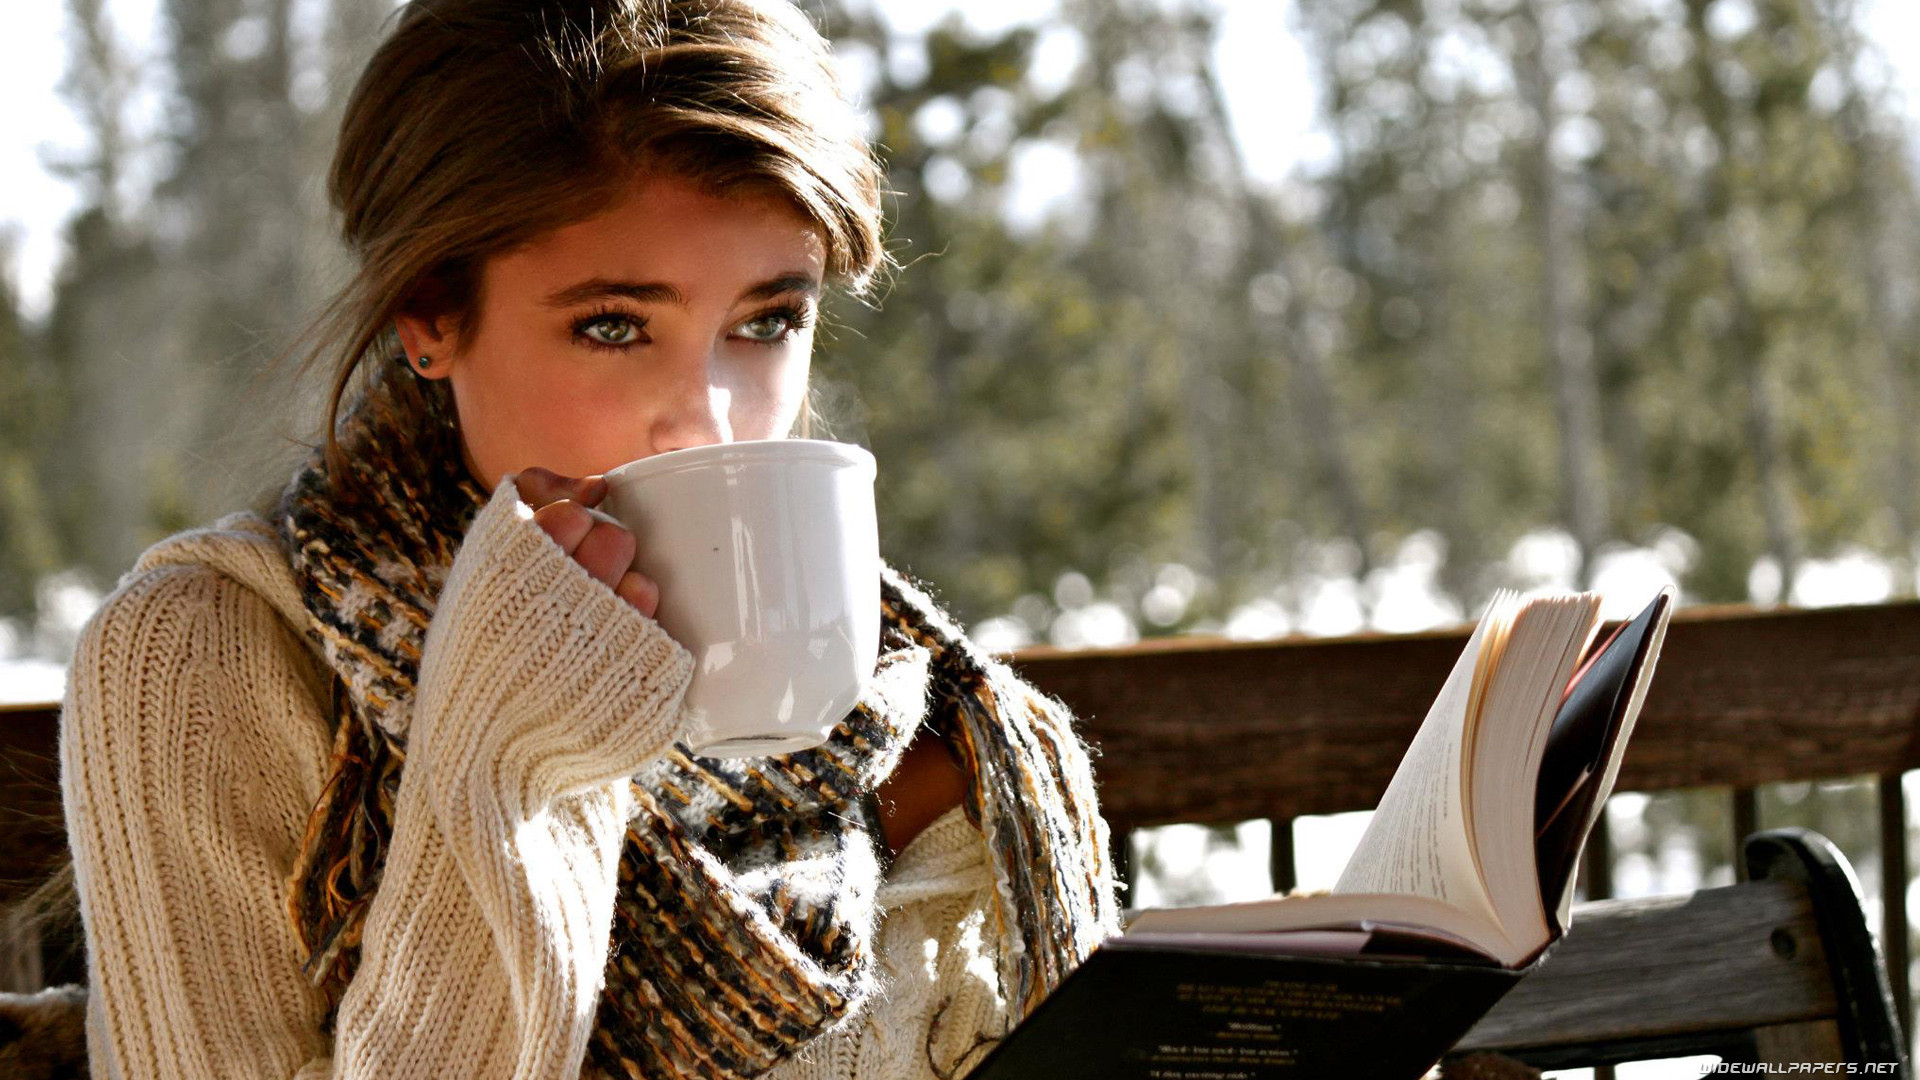 Wallpaper women outdoors model winter books fashion cup spring person taylor marie hill beauty season human action x